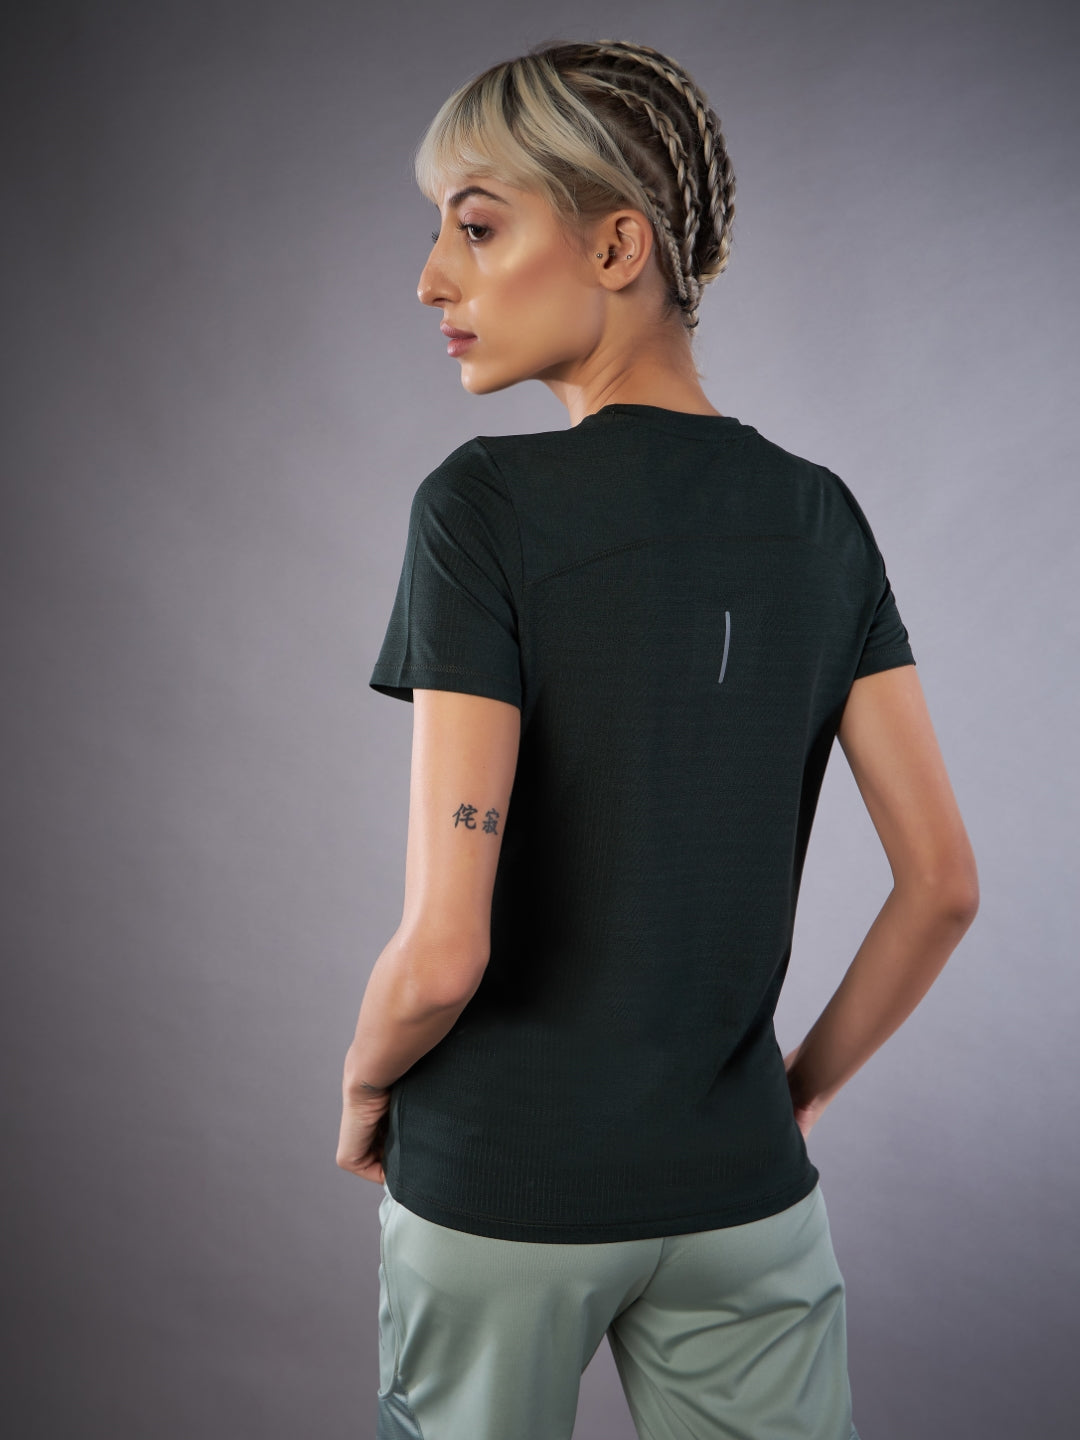 Women's Solid Olive T-shirt